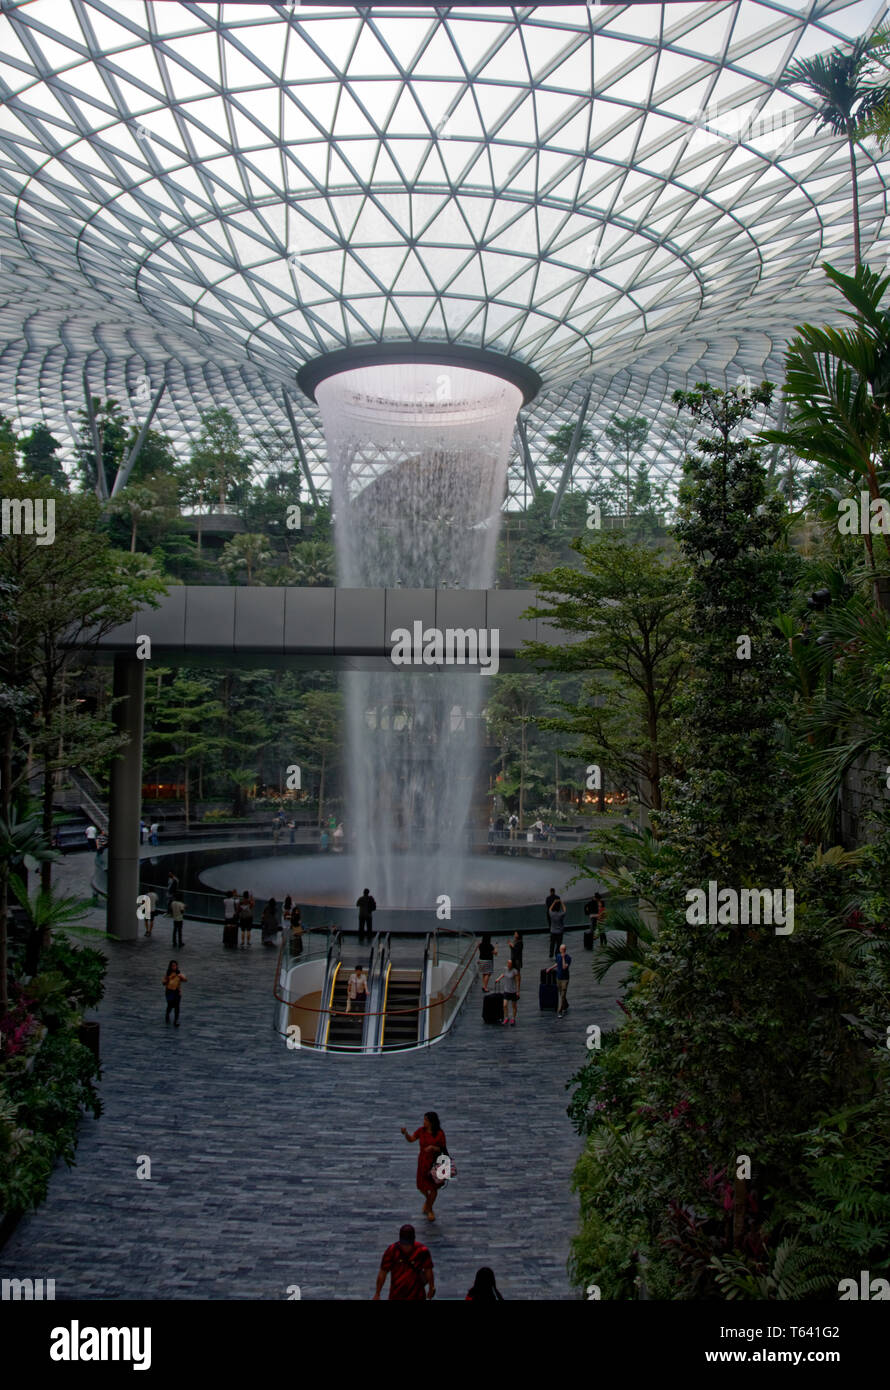 The world's biggest artificial indoor waterfall at the Jewel, Changi airport, Singapore, Asia Stock Photo